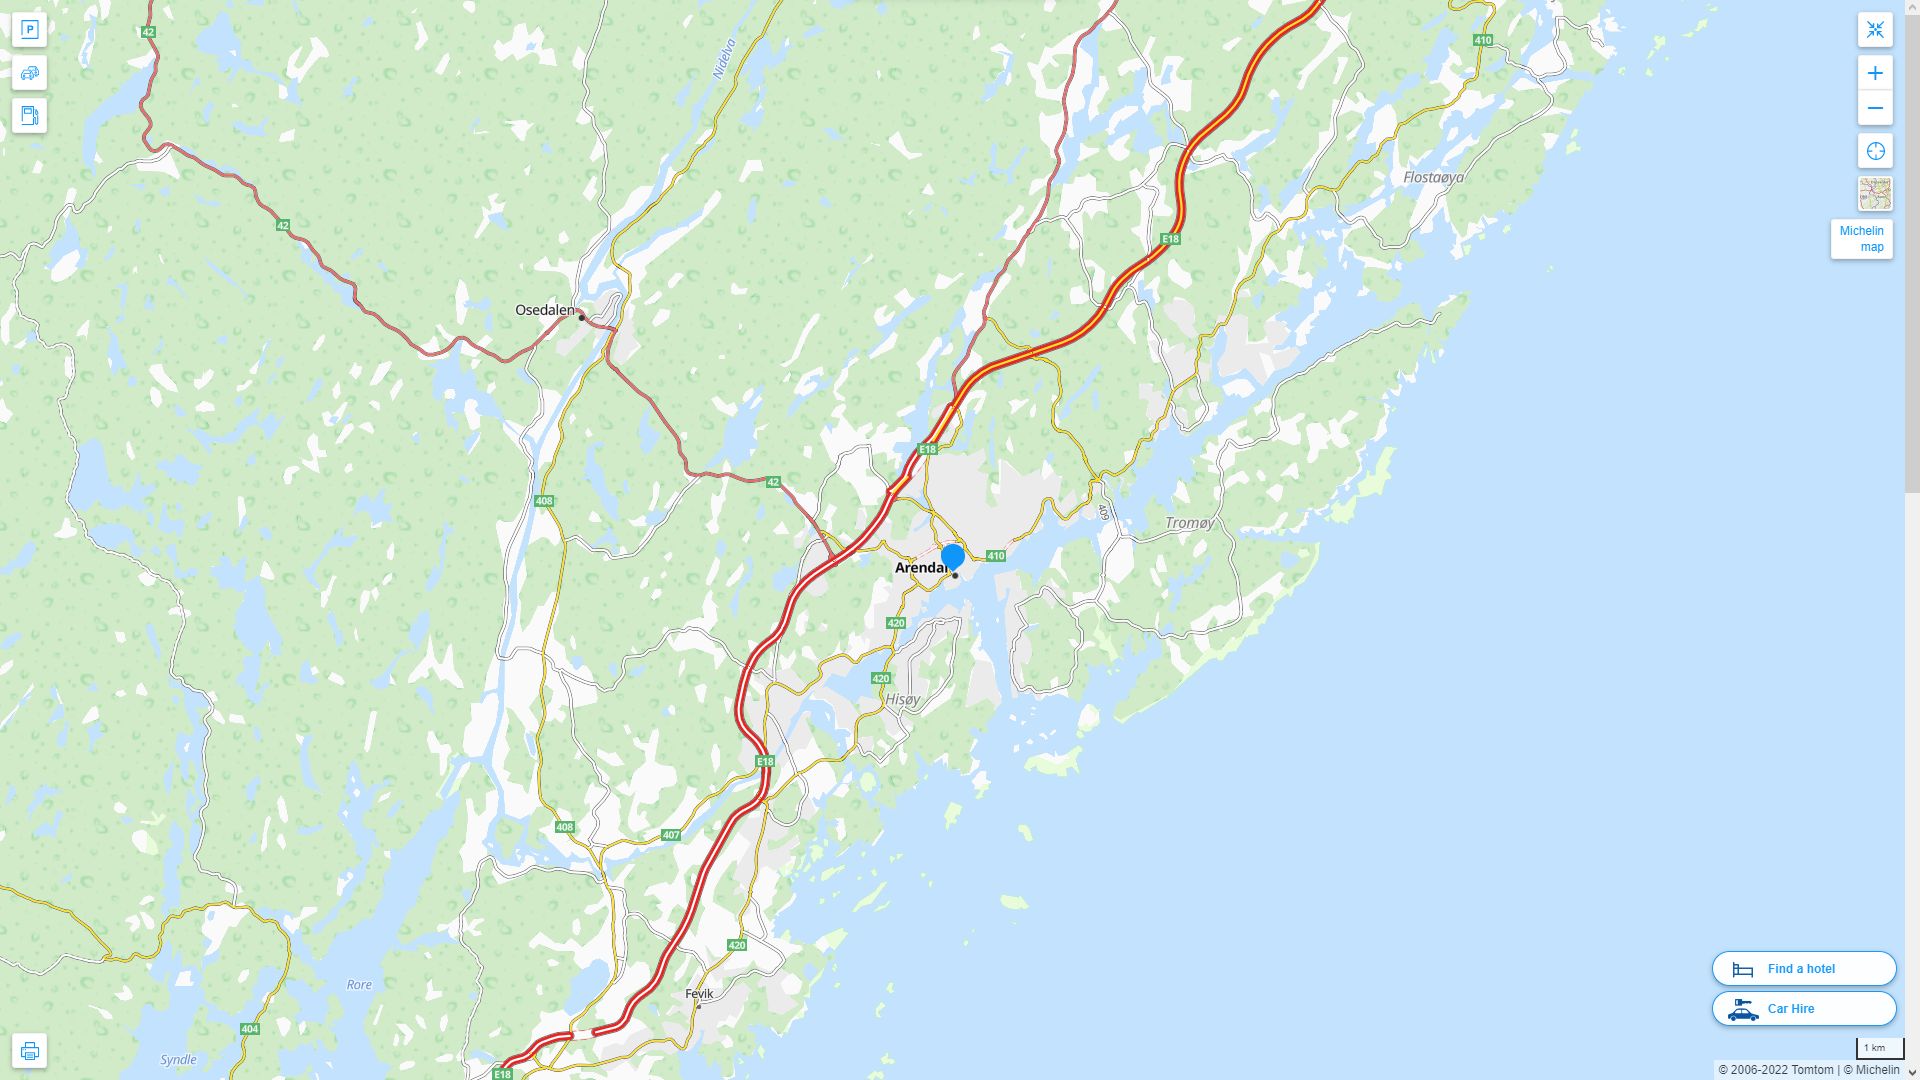 Arendal Highway and Road Map